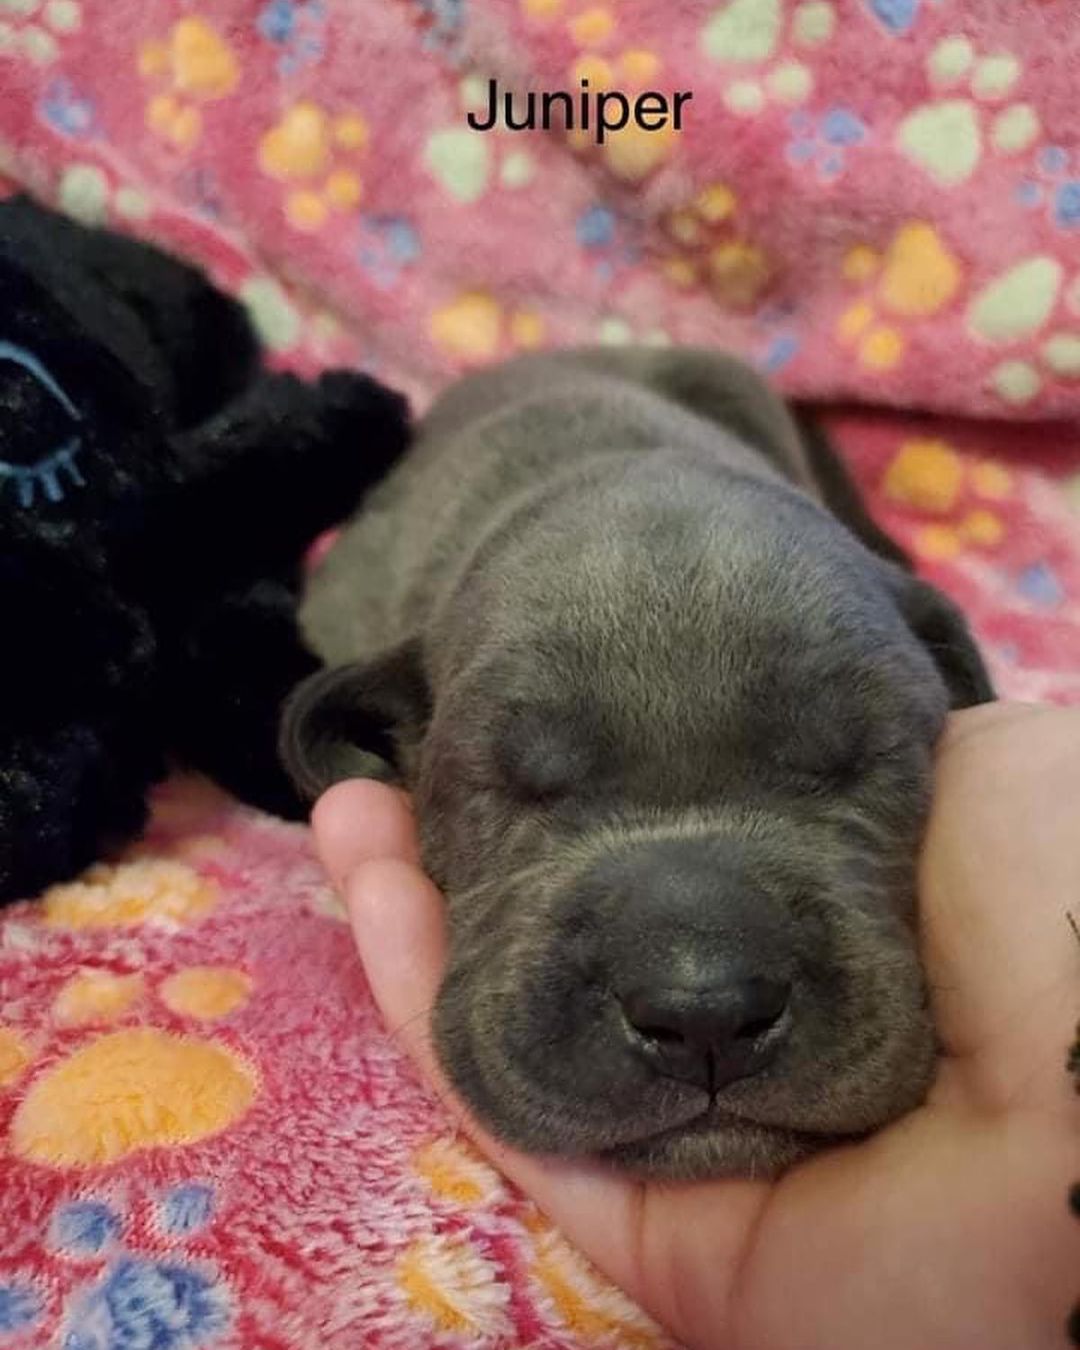 Updated pics of the Bluey litter! 

They love the puppies from Amazon. At $30-$40 each, it would be impossible for us to purchase them for each litter. Thank you to everyone that purchased from their Amazon list! They will go to their furever homes as well. 

<a target='_blank' href='https://www.instagram.com/explore/tags/bdhp/'>#bdhp</a> <a target='_blank' href='https://www.instagram.com/explore/tags/bdhpi/'>#bdhpi</a> <a target='_blank' href='https://www.instagram.com/explore/tags/bigdogshugepaws/'>#bigdogshugepaws</a>